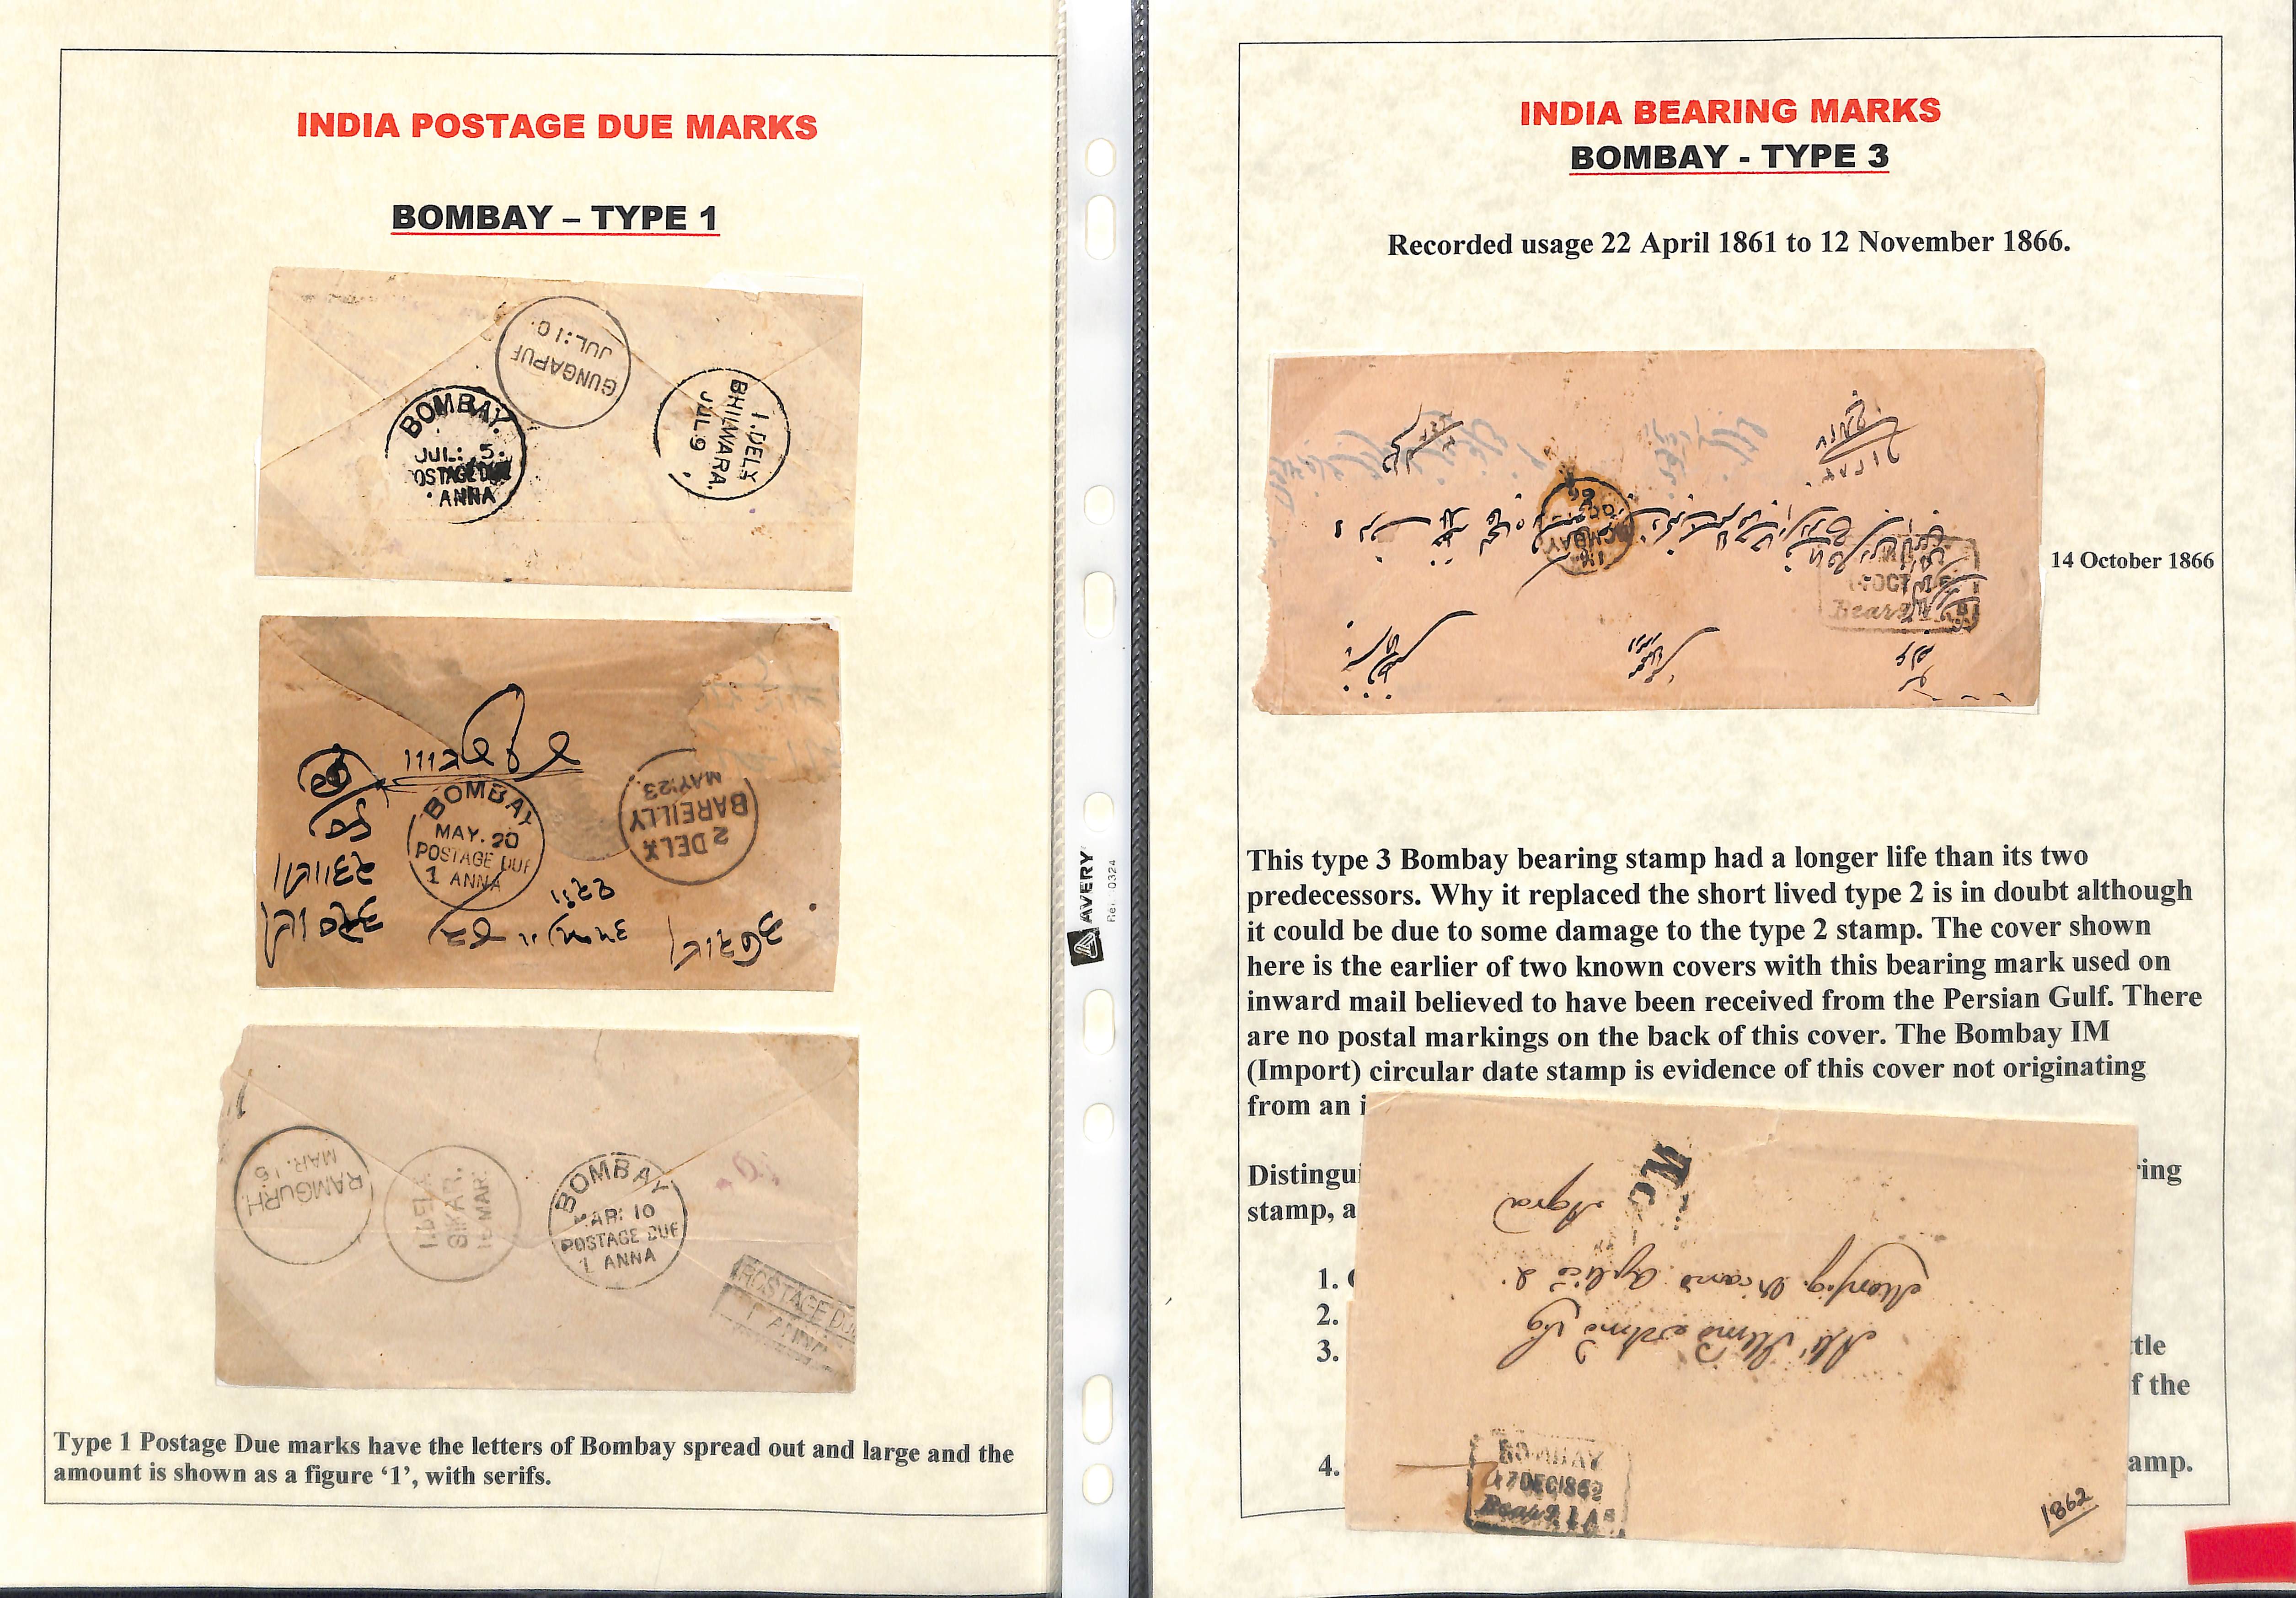 Bombay. 1860-1901 Covers with Bombay Postage Due or Bearing handstamps, the study of types with - Image 5 of 8